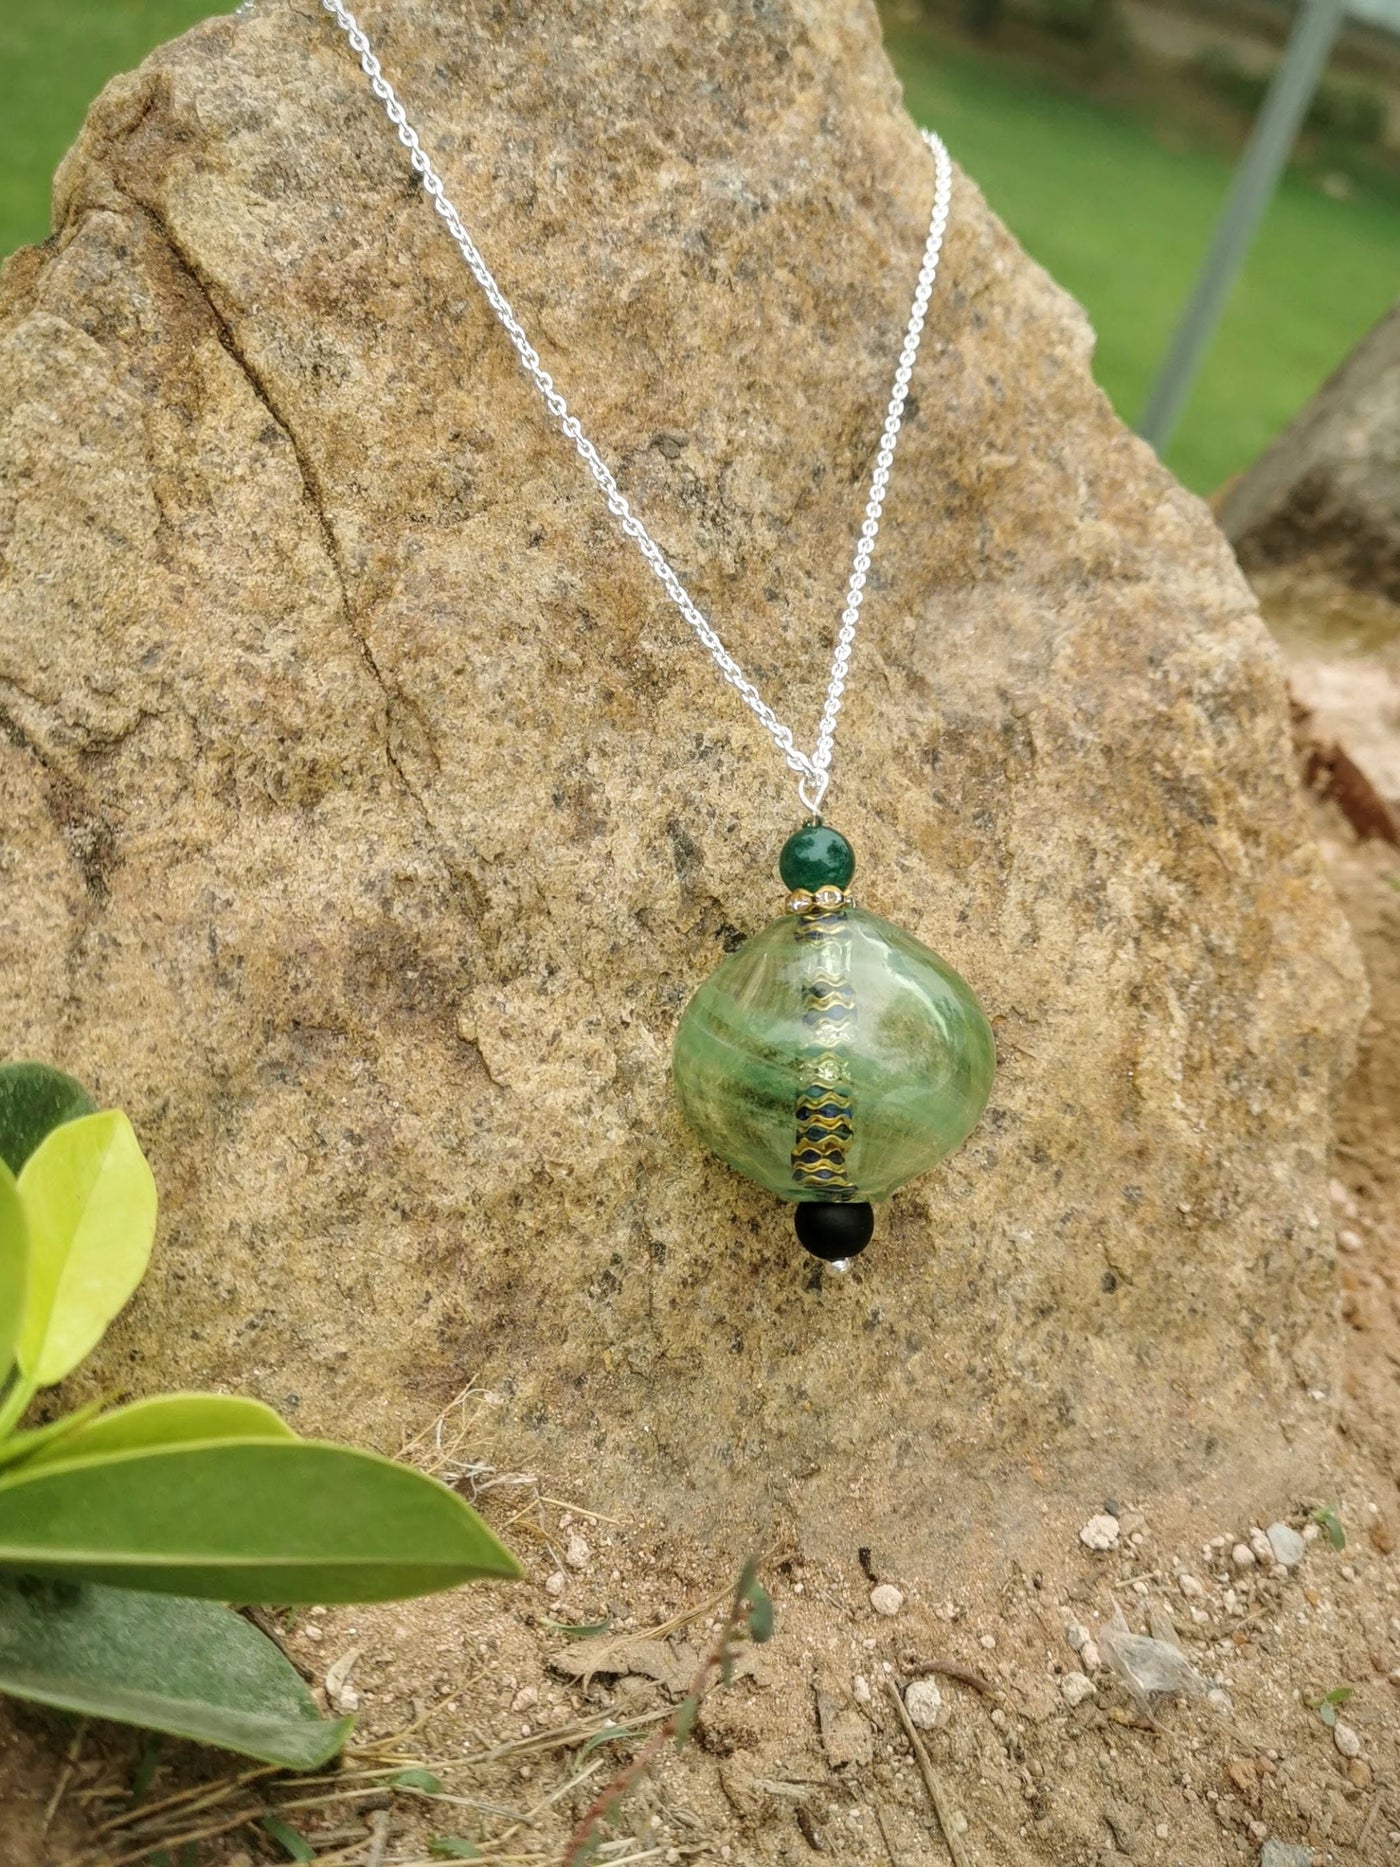 Classic Charm Necklace - Green